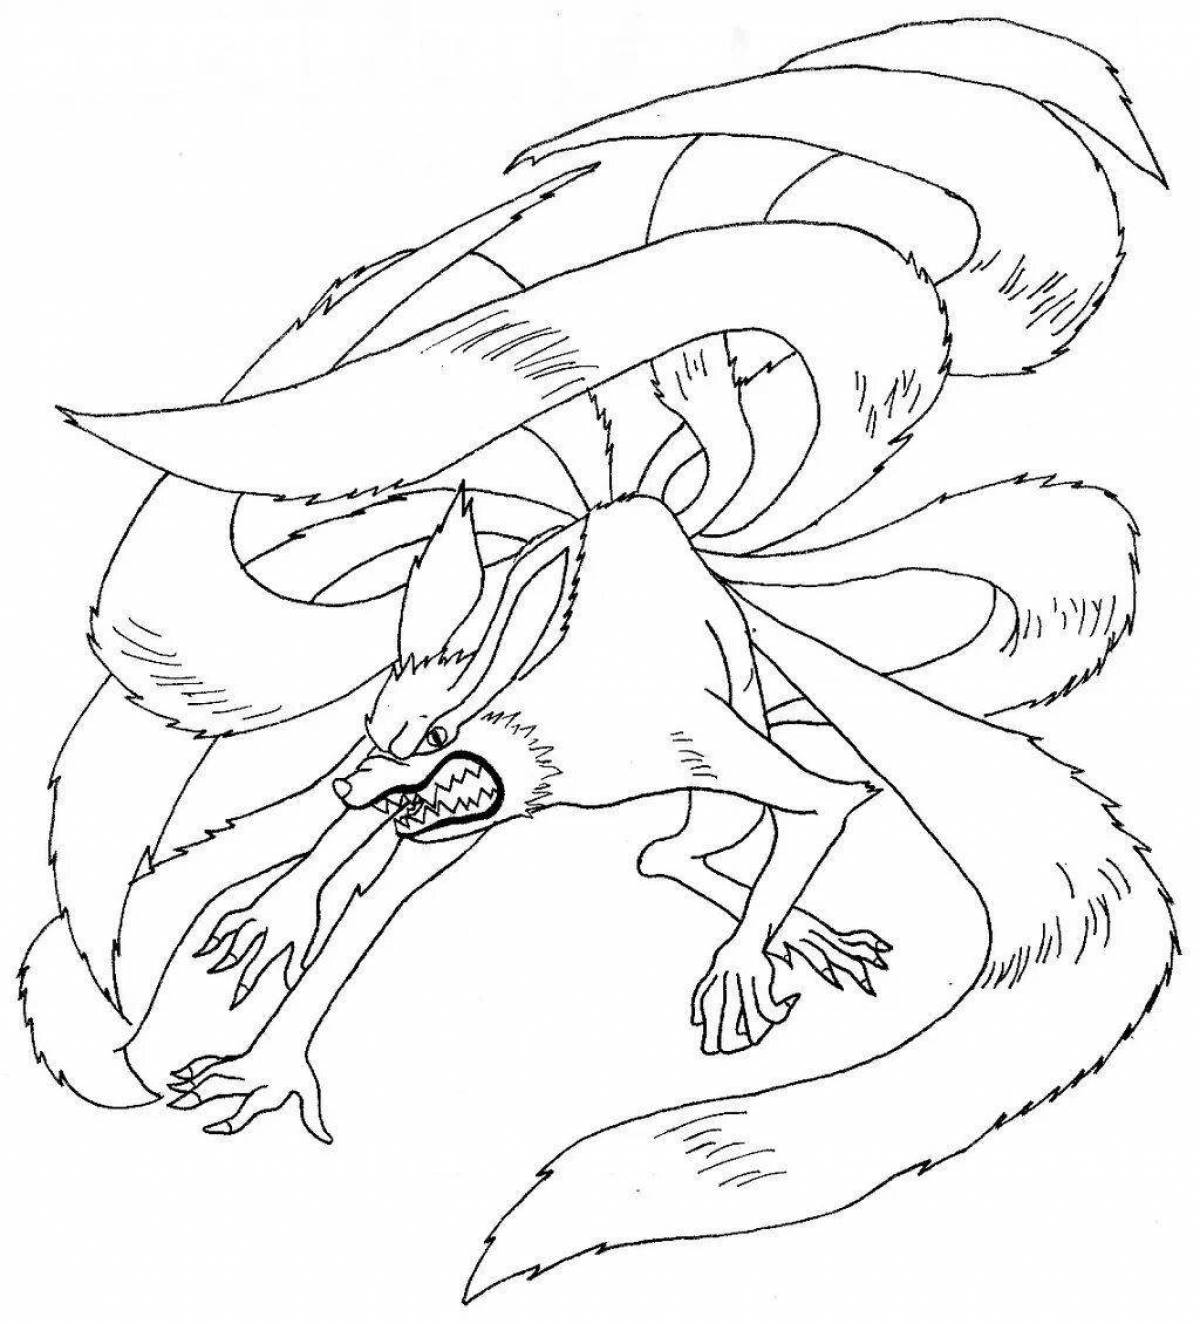 Bright 9-tailed fox coloring